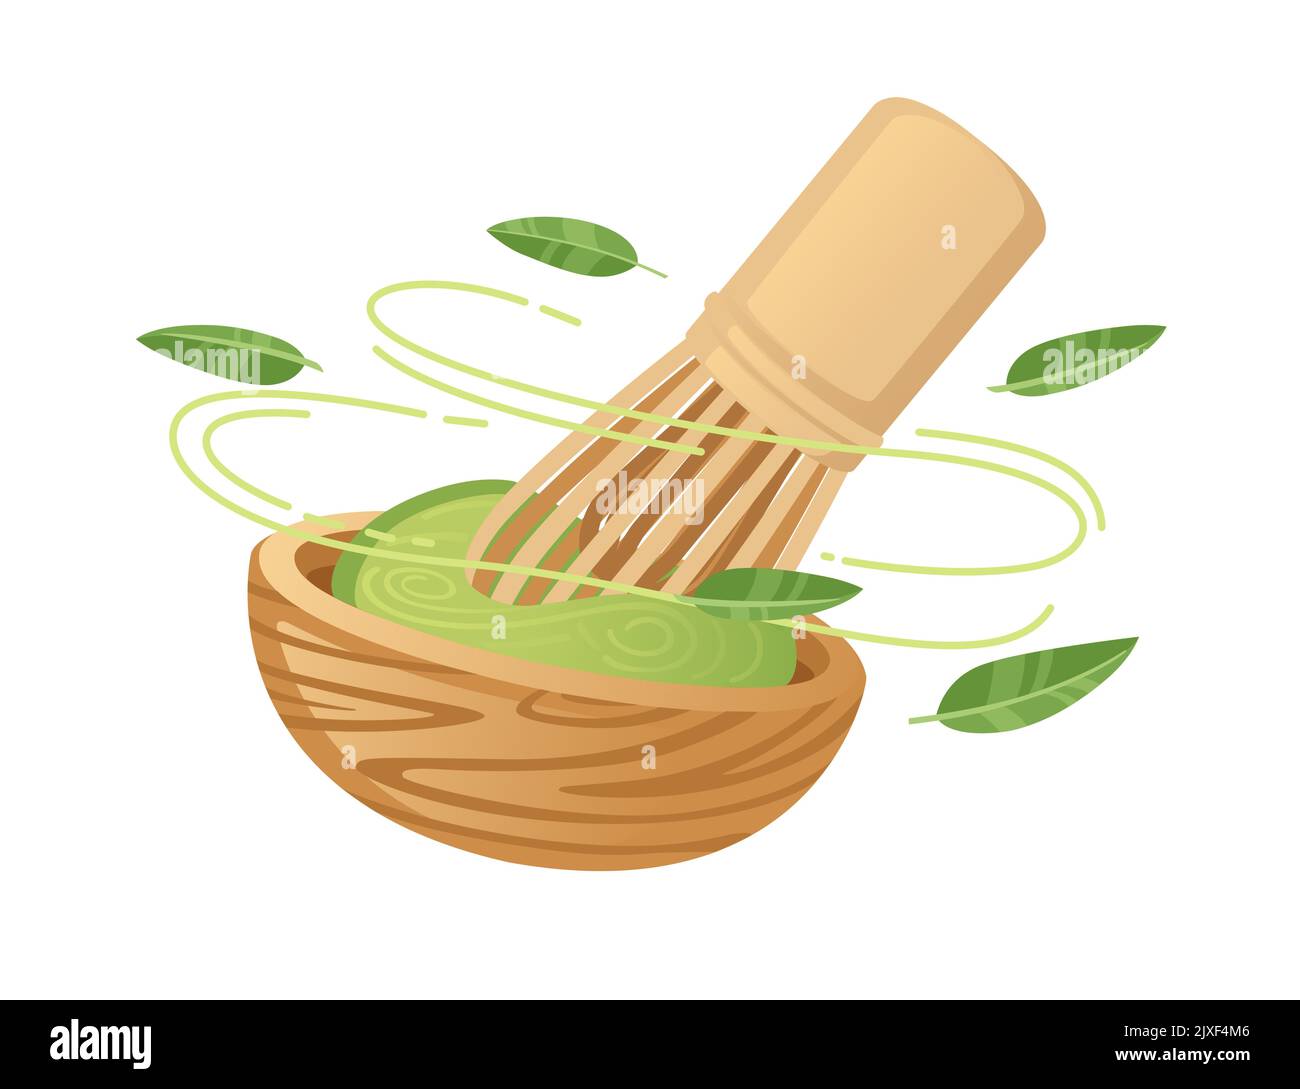 Wooden matcha whisk tool tradition equipment vector illustration isolated on white background Stock Vector